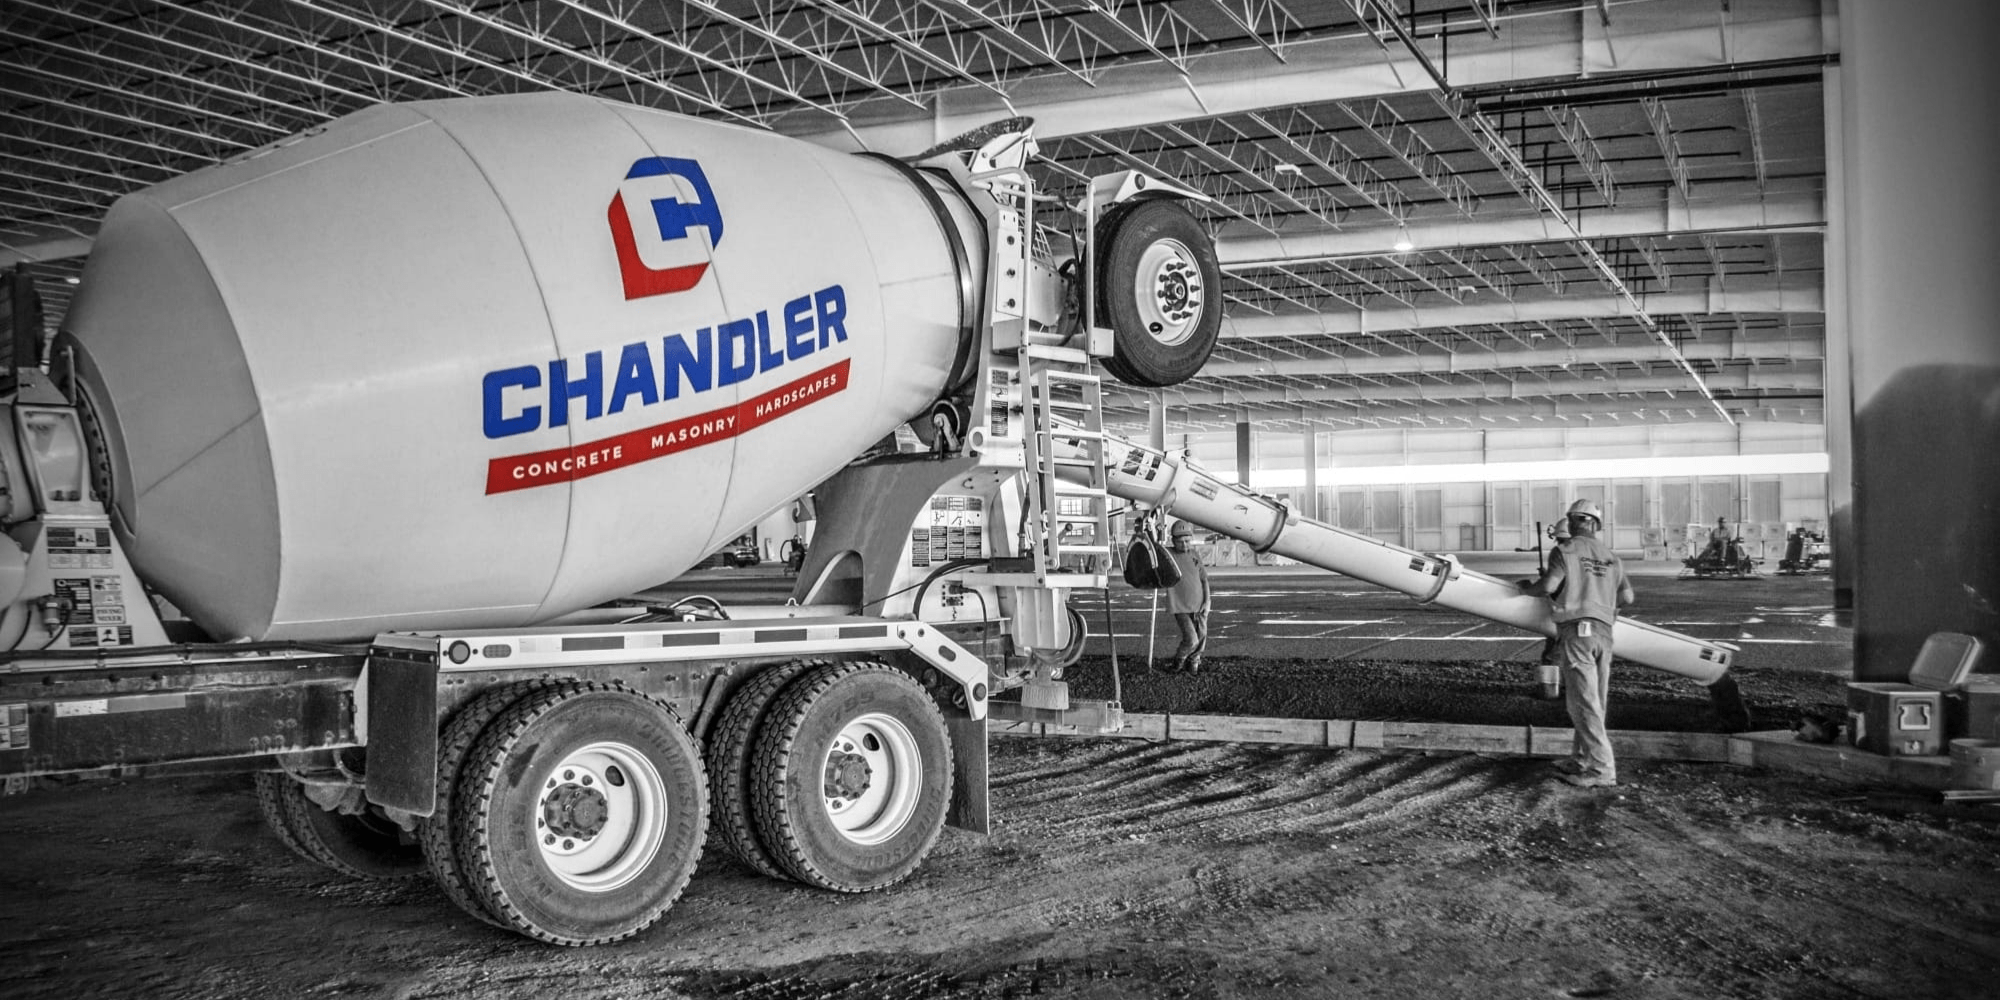 Illustration: Case Study: How Chandler Concrete Uses PSPDFKit to Optimize and Digitize Its Employees' Document Workflow in the Field